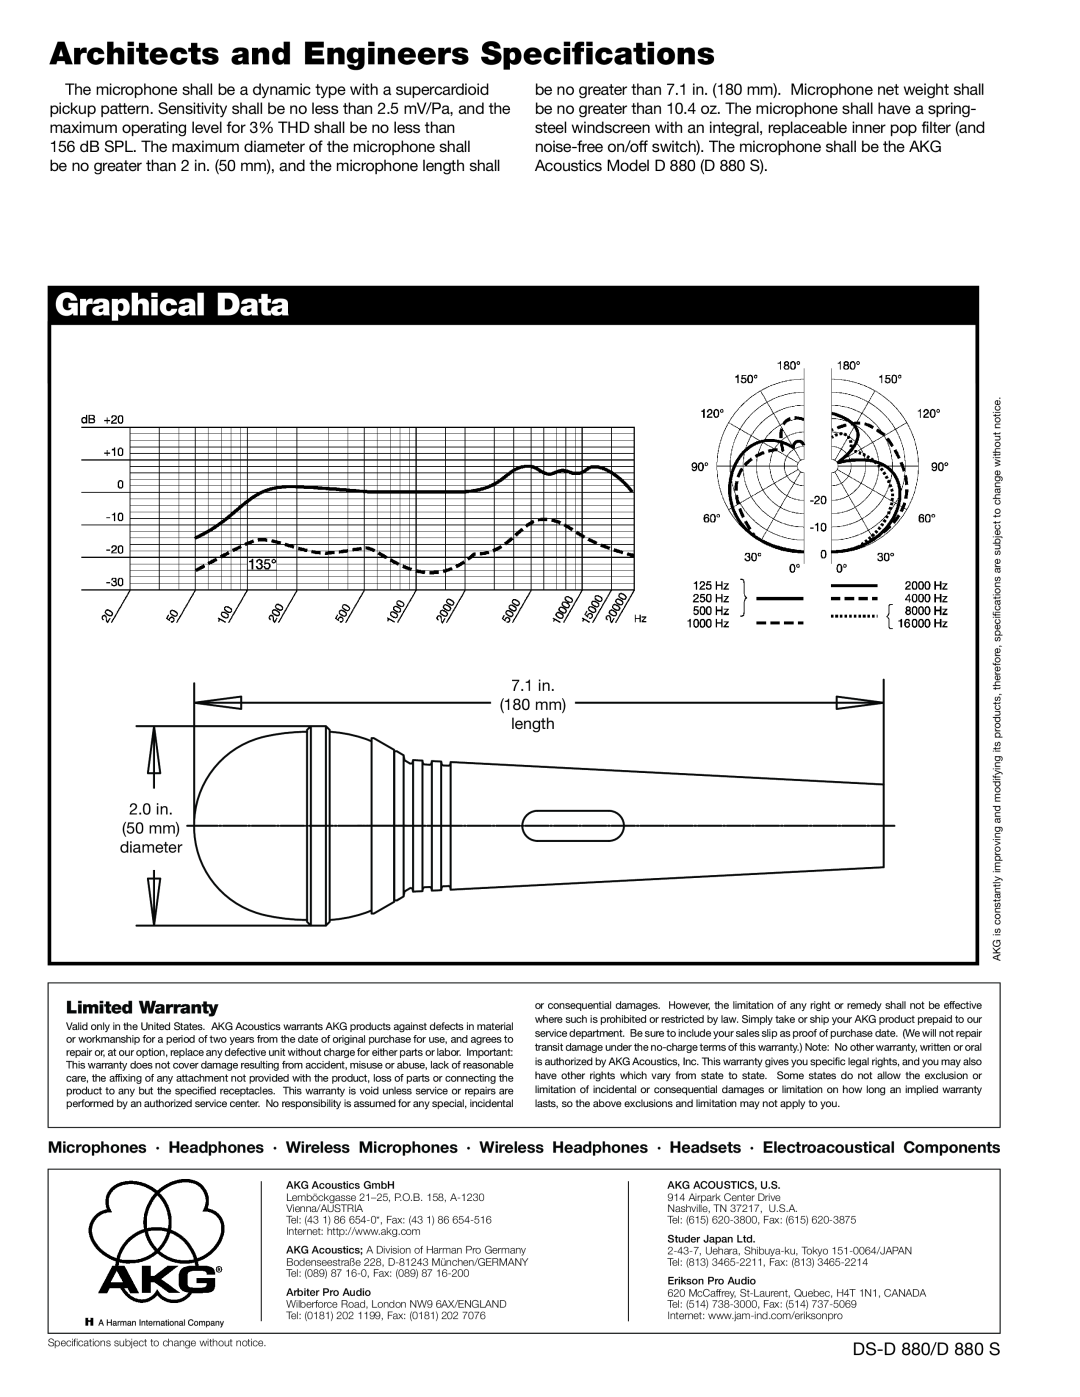 AKG Acoustics D 880S Architects and Engineers Specifications, Graphical Data, Limited Warranty, DS-D 880/D 880 S, 180 mm 